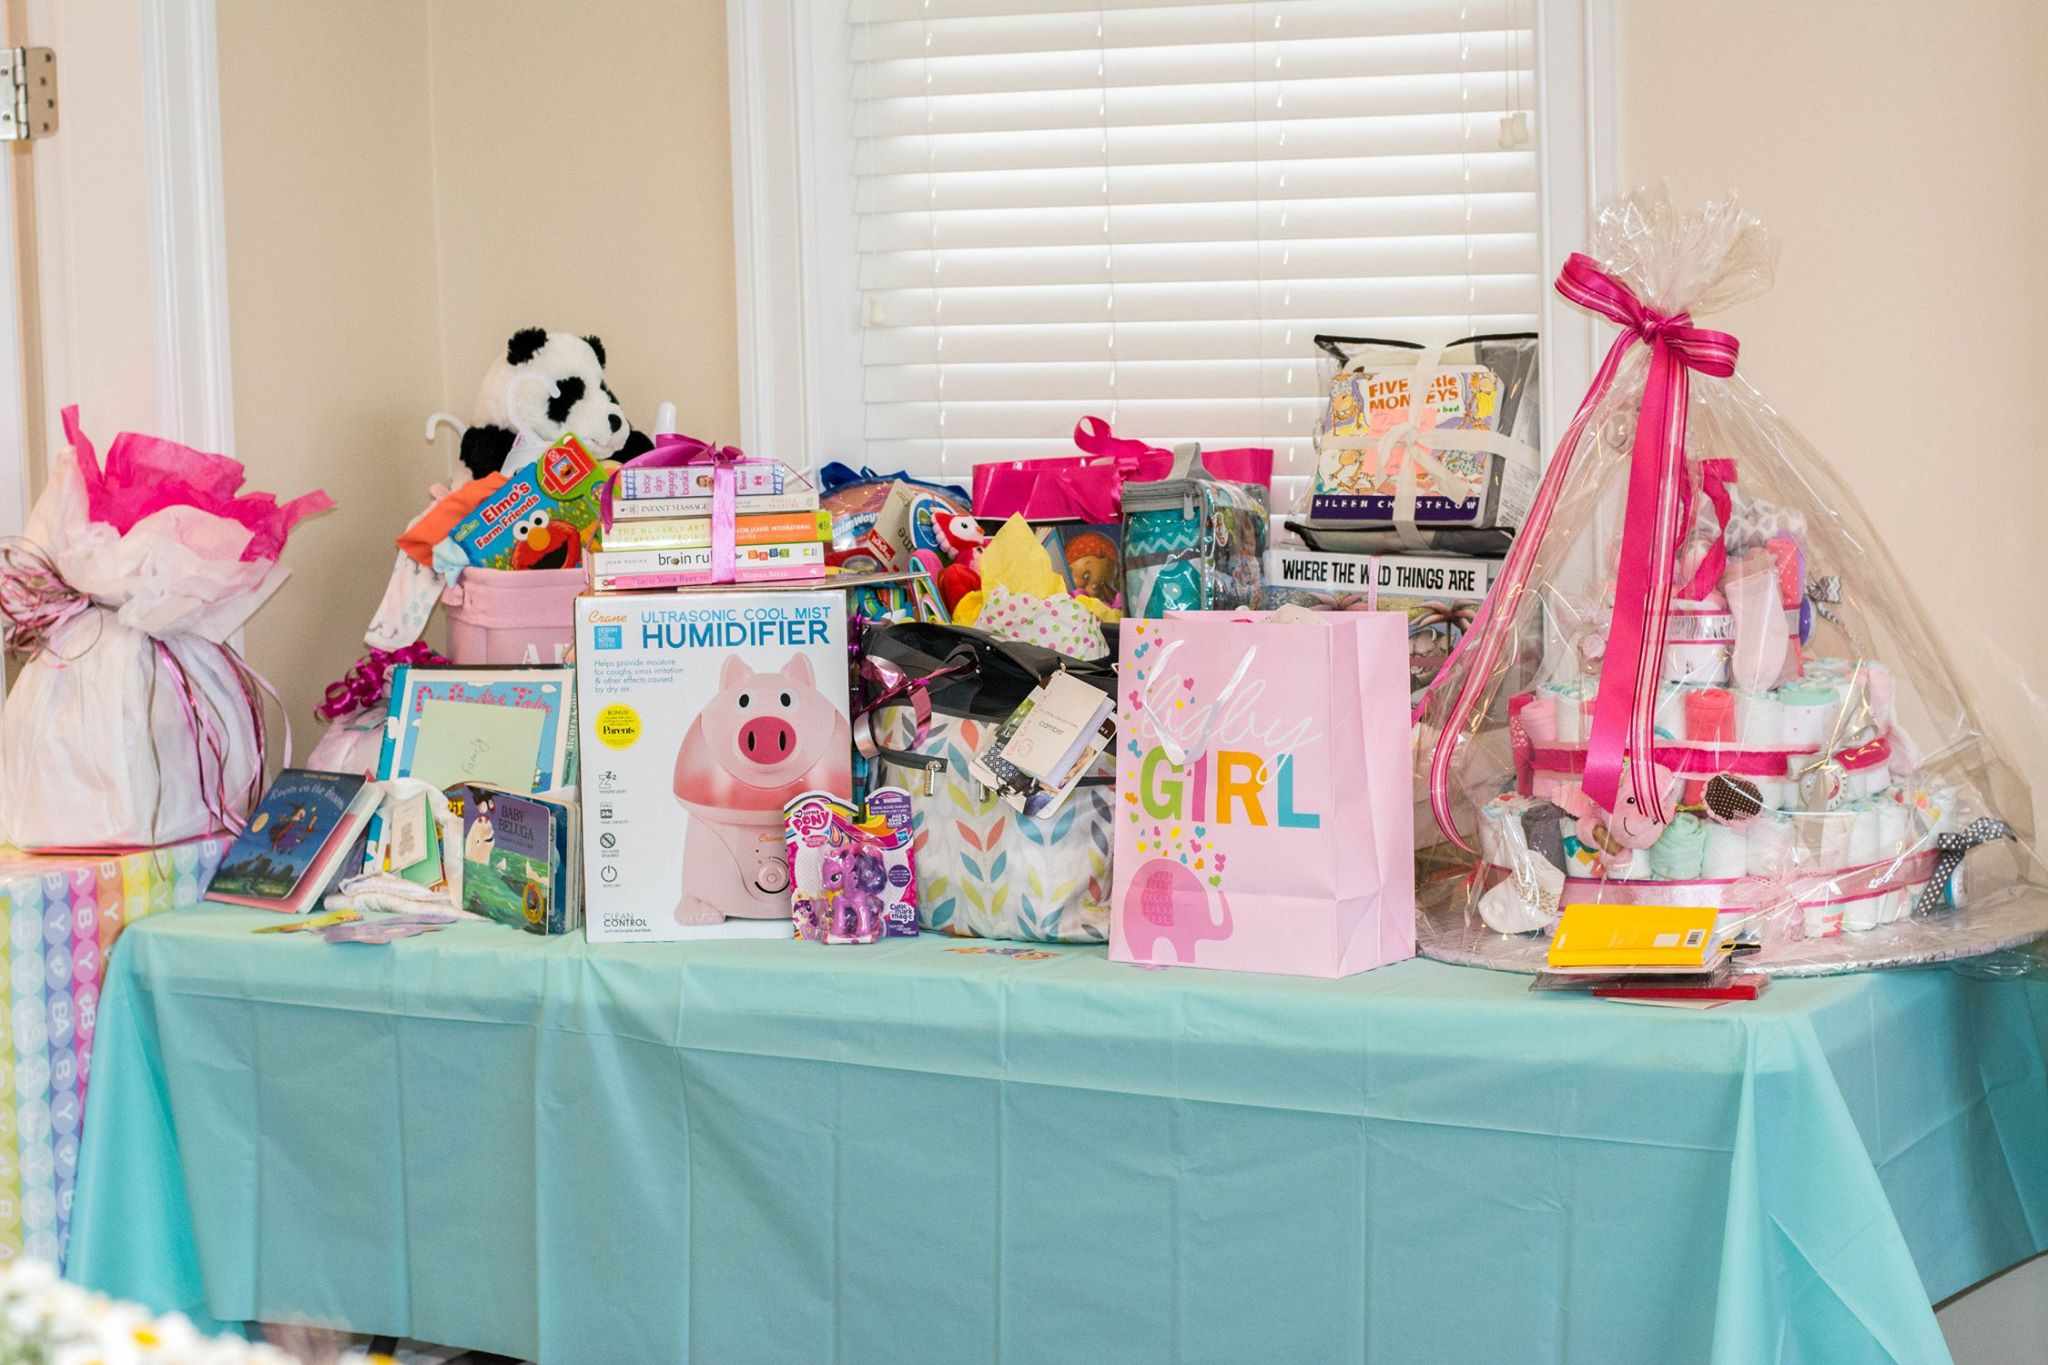 Big Baby Shower Gifts
 prehensive Baby Registry Guide Saving Amy